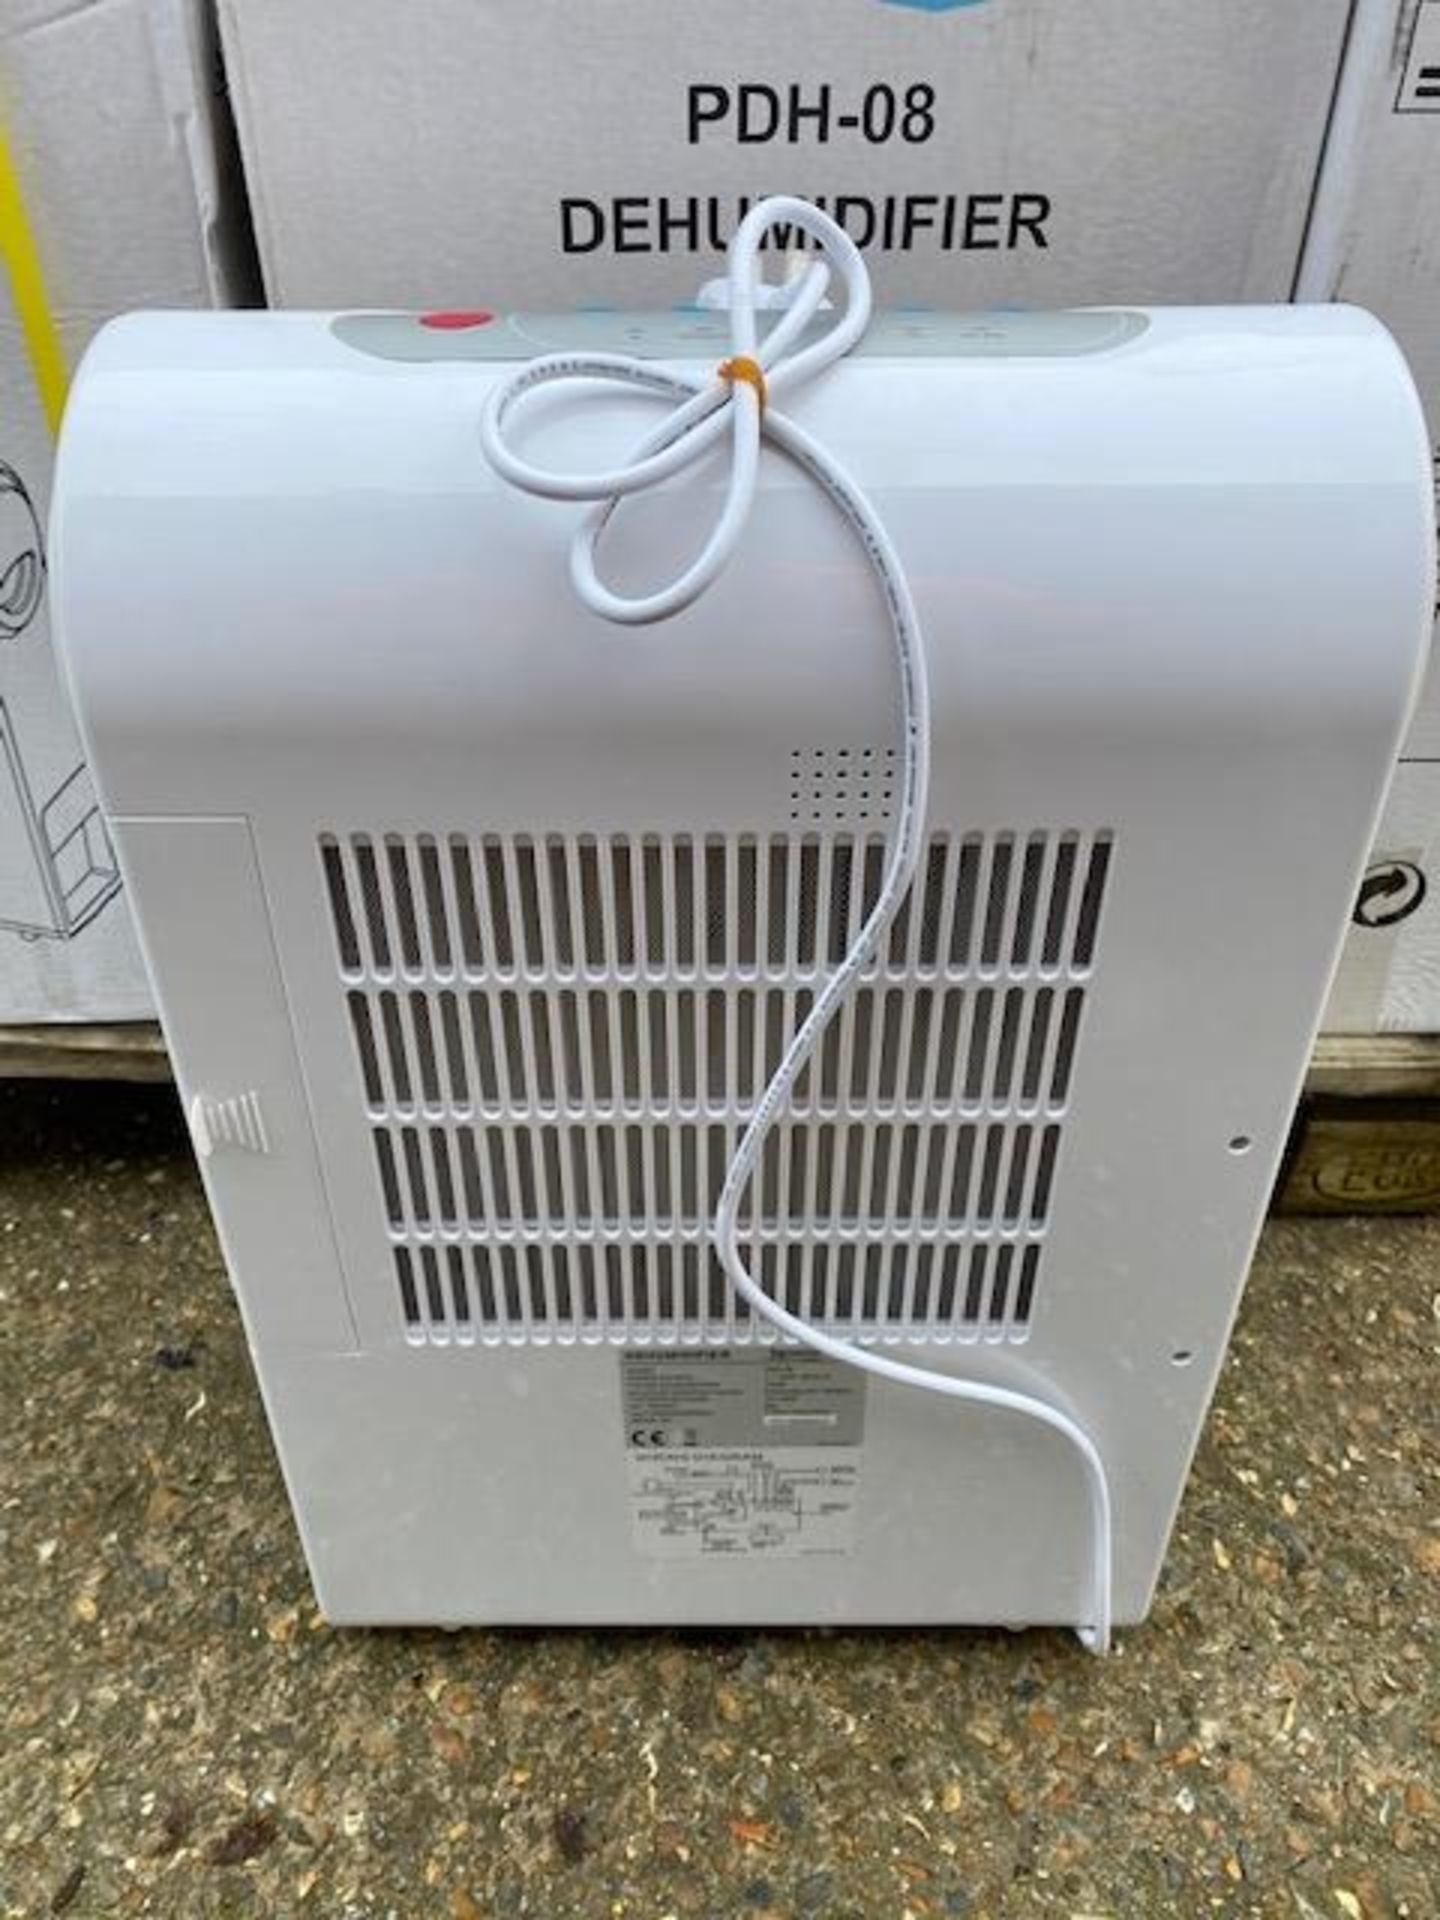 10x Servool PDH-08 Dehumidifiers, 220-240V, 50Hz - Image 3 of 12